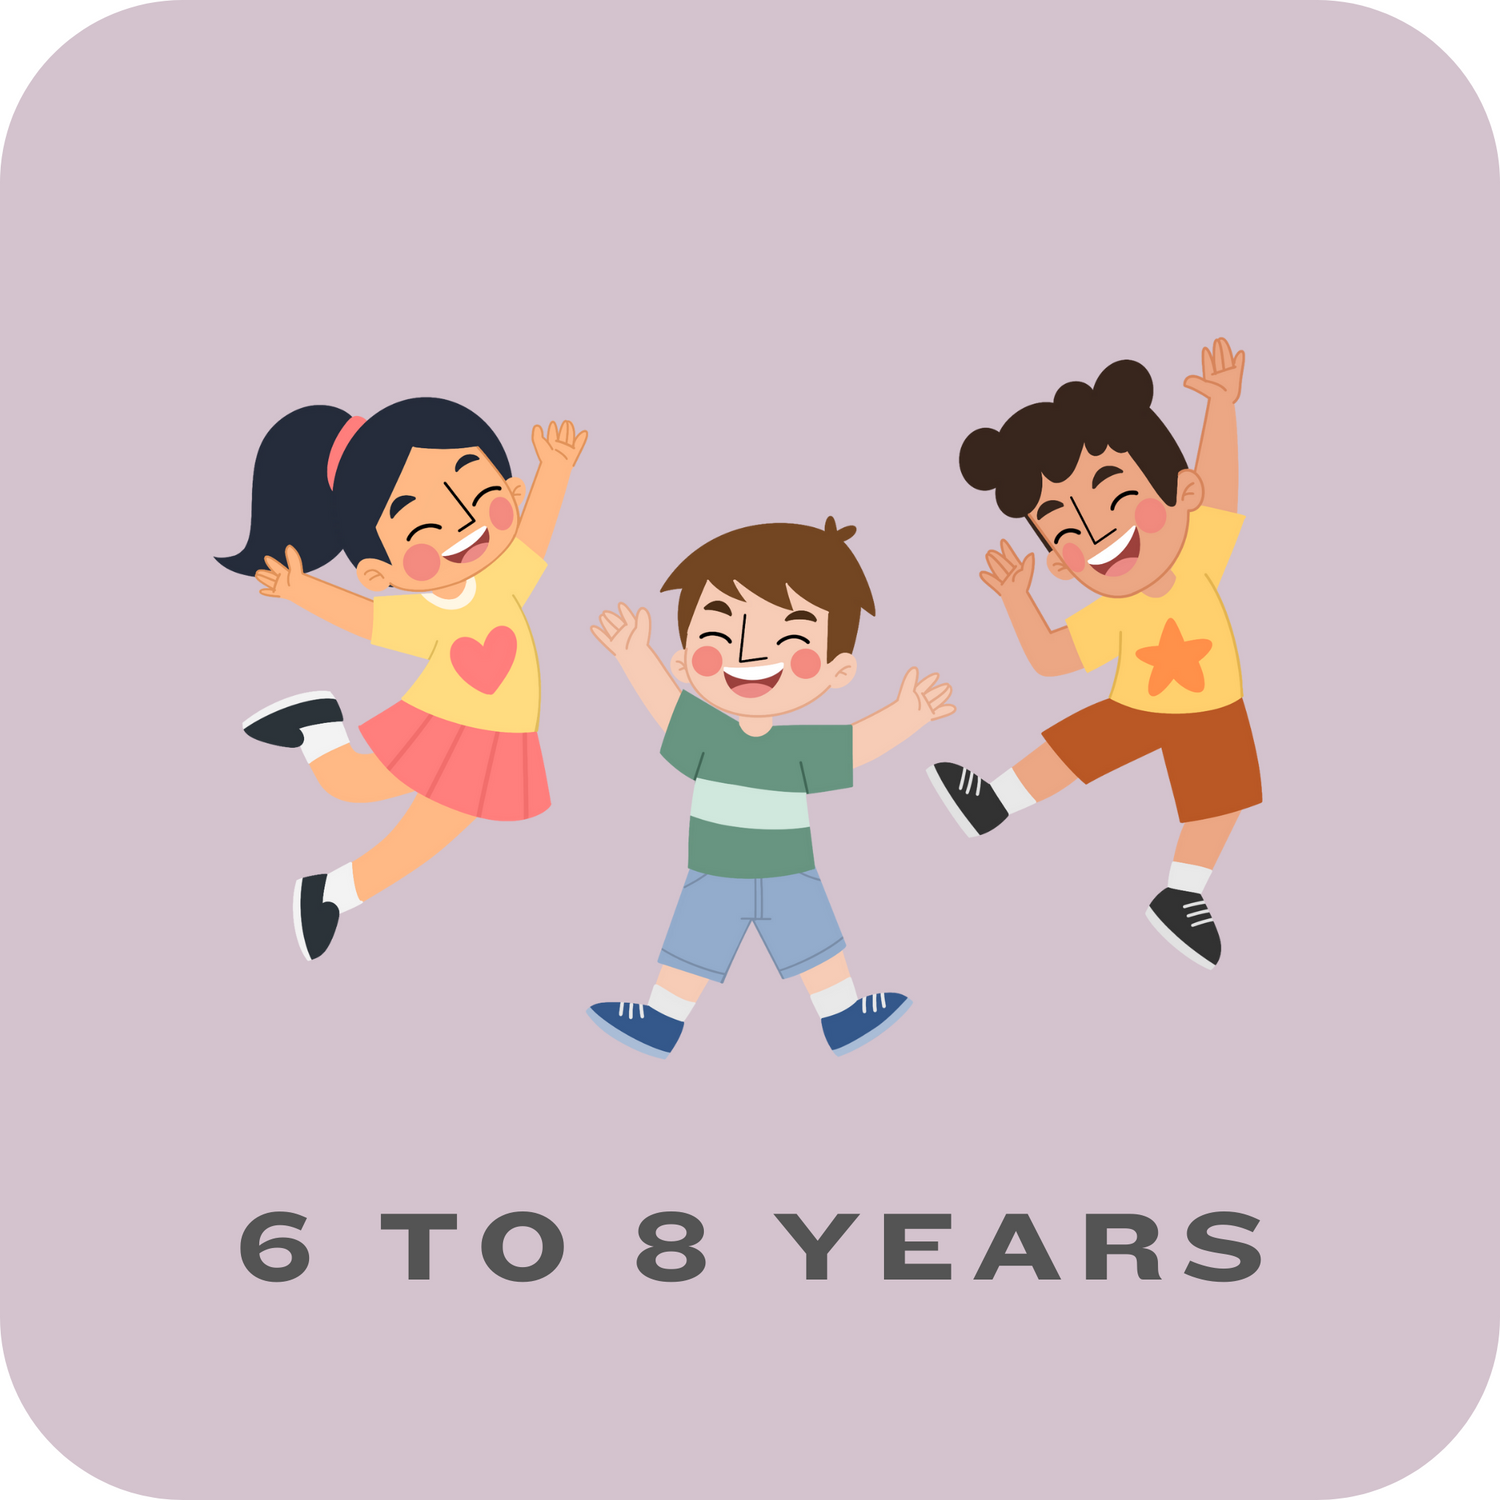 6 to 8 Years